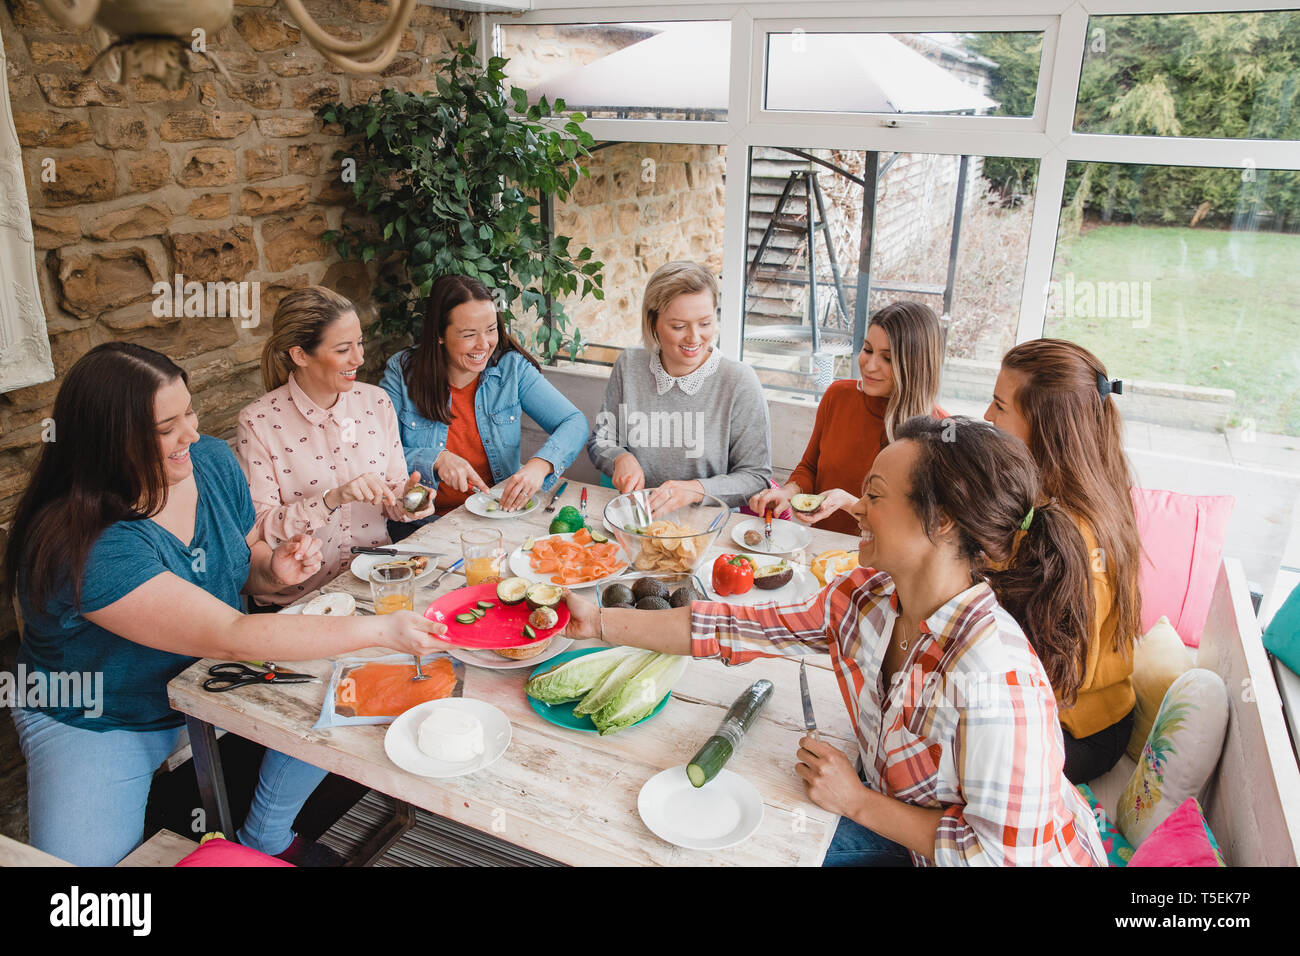 Small group of female friends with a mixed age range sitting at a table preparing their dinner. Stock Photo